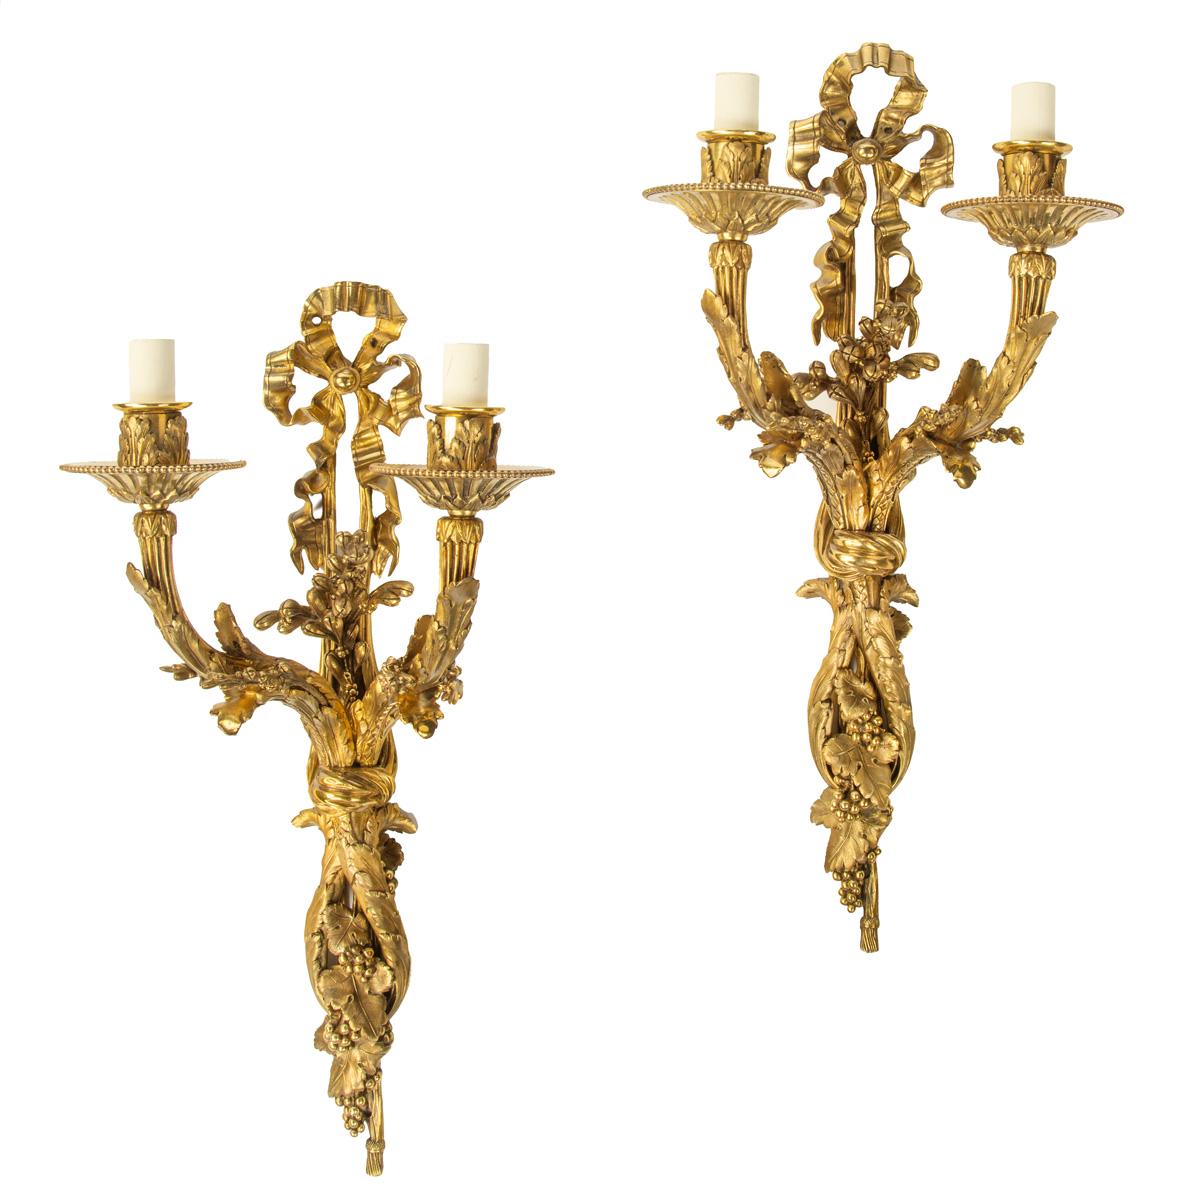 A pair of Napoleon III two-branch ormolu wall lights, each in the form of a tied ribbon supporting a stem of fruiting vines and foliage with gadrooned drip trays and acanthus carved socles, now wired for electricity. French, circa 1860.

